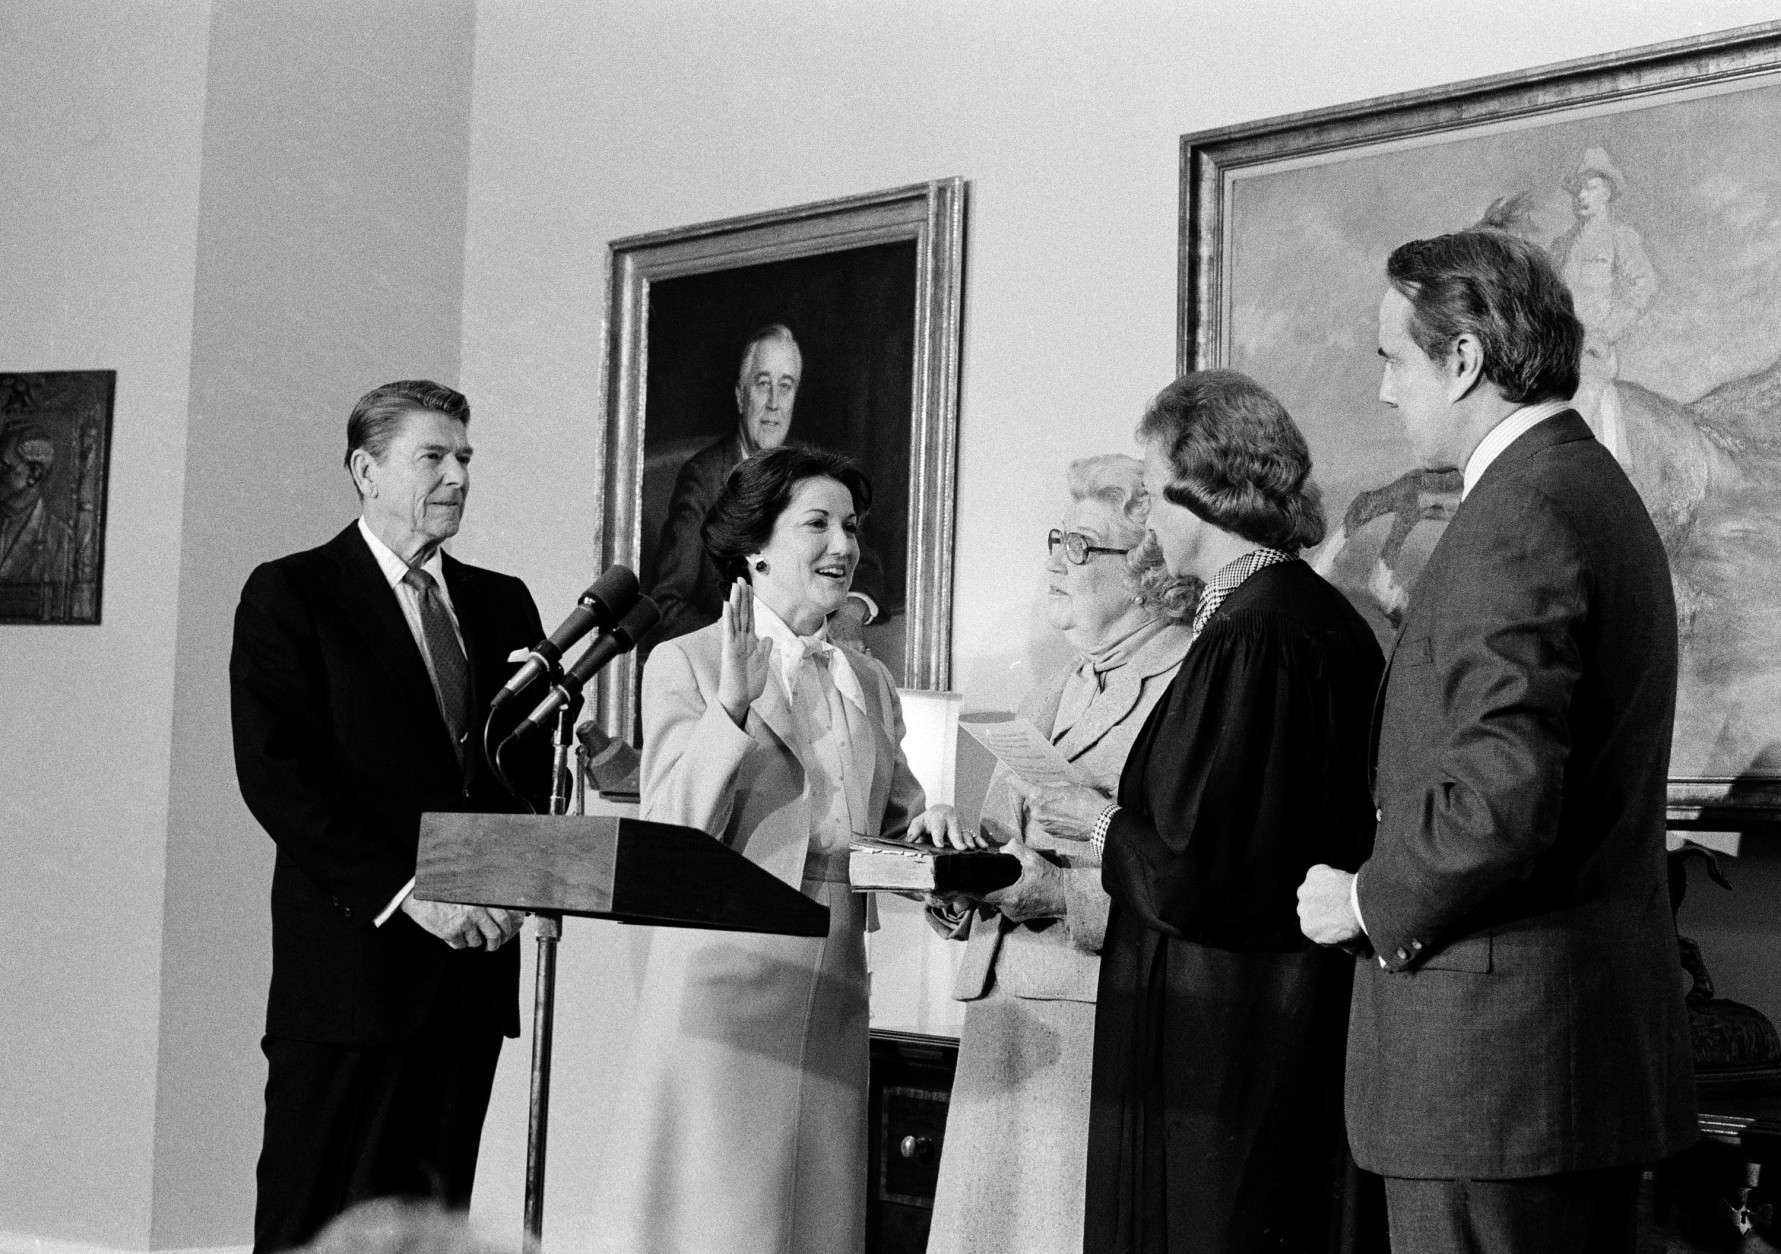 Supreme Court Justice Sandra Day O'Connor swears in Elizabeth Dole as the new Transportation Secretary, as President Reagan looks on at left, in an East Room ceremony at the White House, Feb. 7, 1983.  At far right is the husband of the secretary, Sen. Robert Dole, R-Kan., and at center is her mother, Mary Hanford.  (AP Photo)